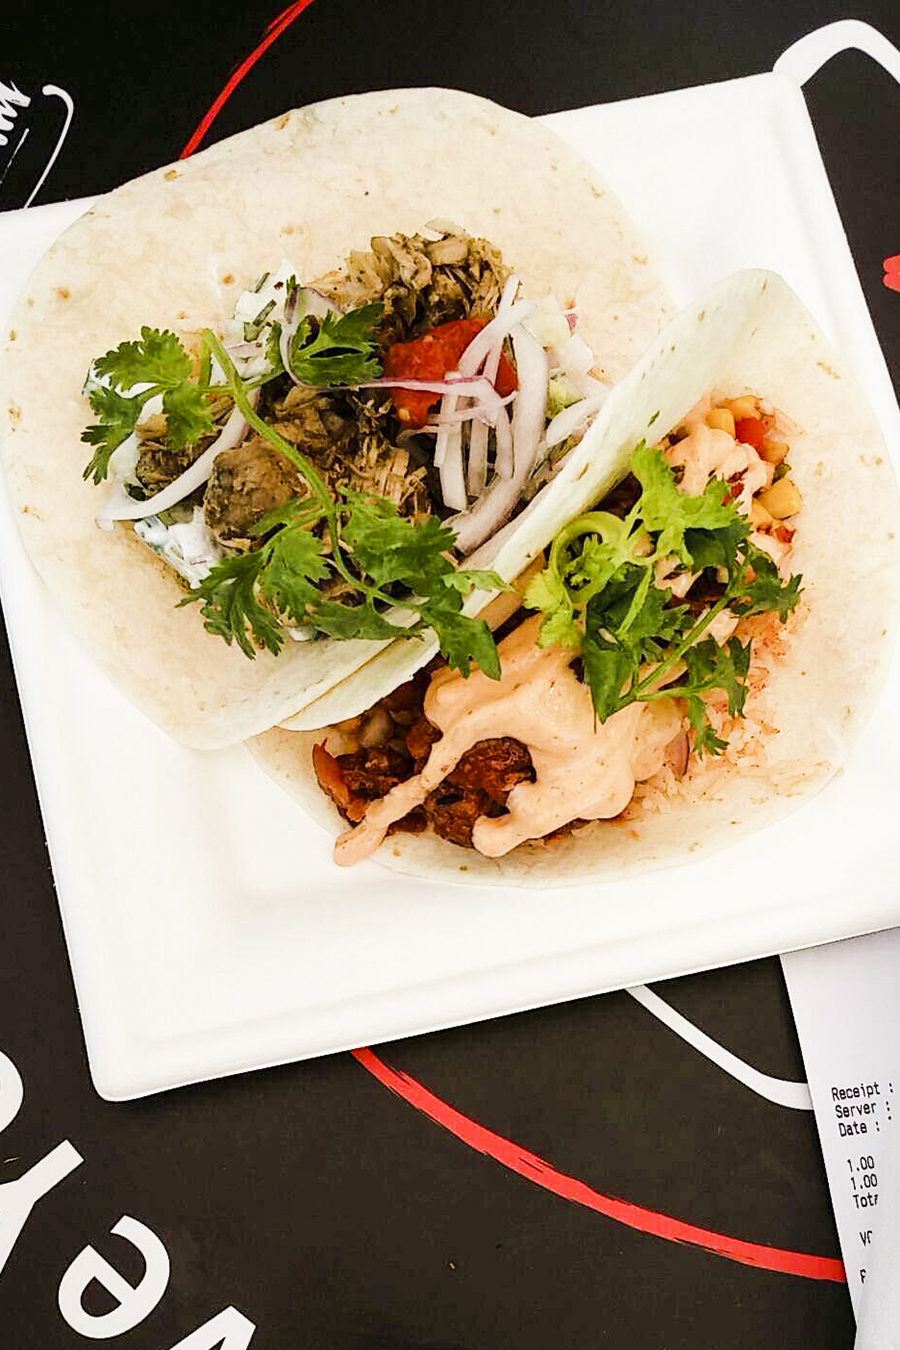 Delicacy Tacos at Savour Gourmet 2016.